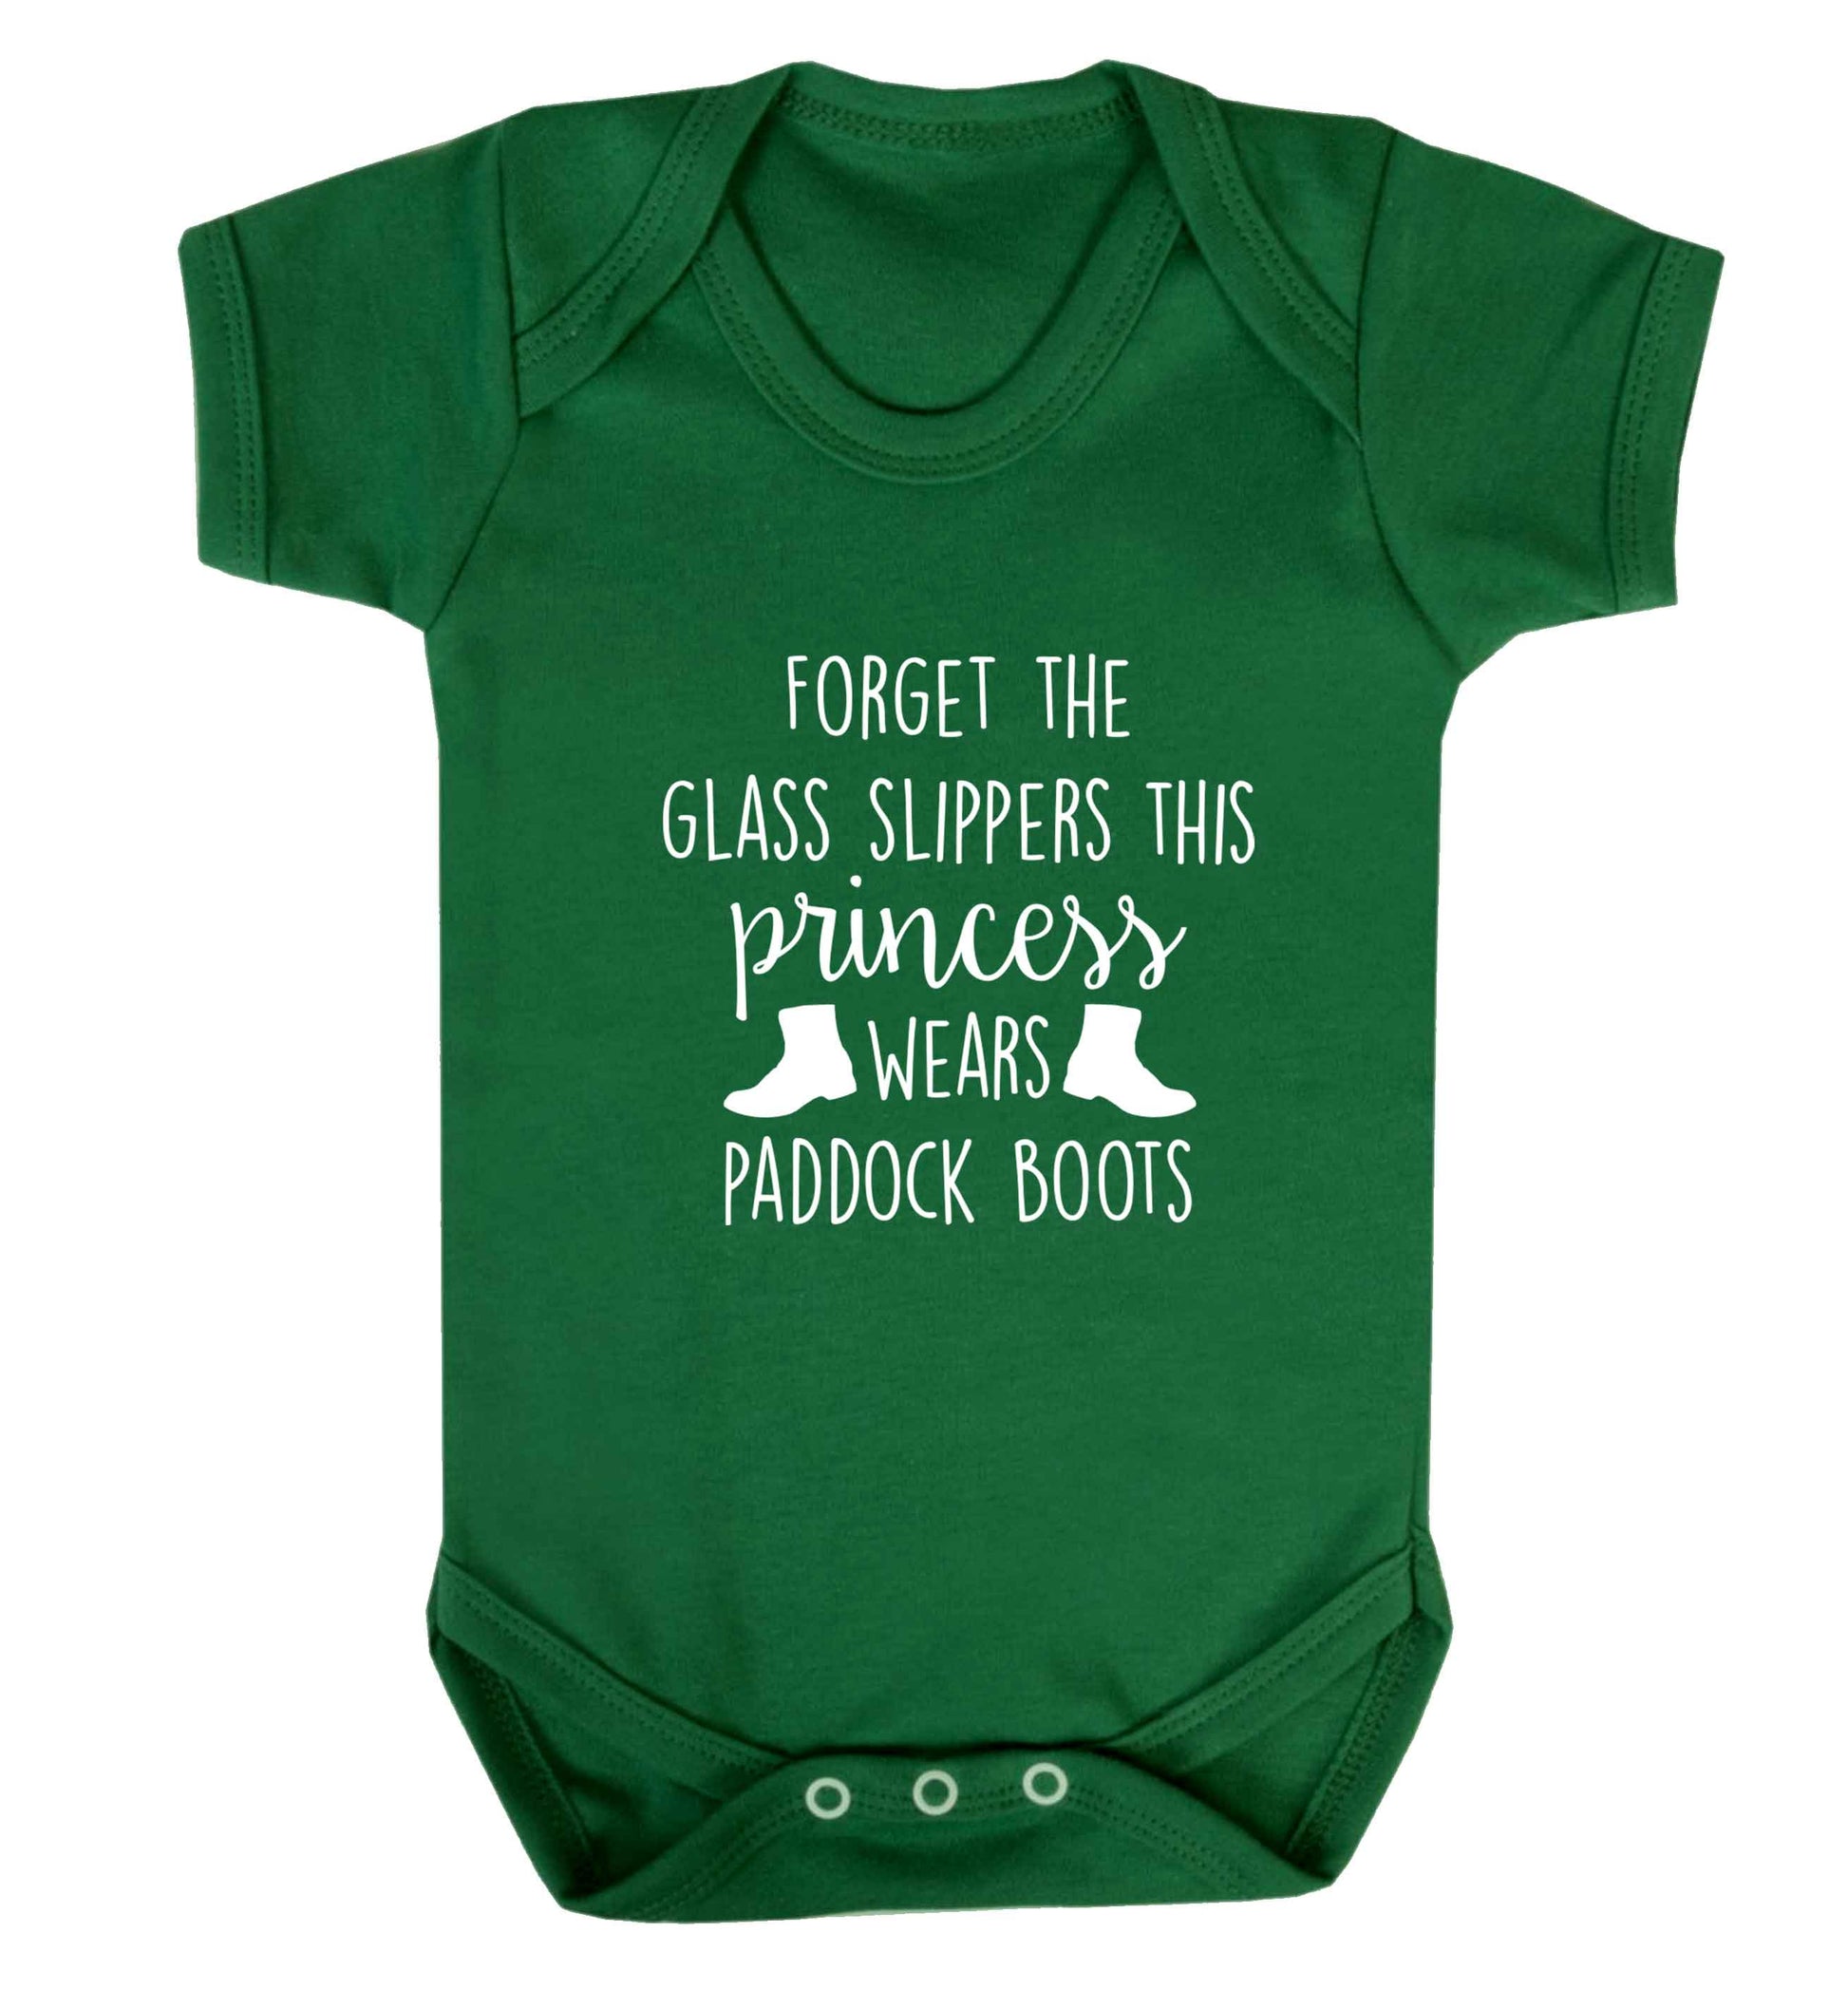 Forget the glass slippers this princess wears paddock boots baby vest green 18-24 months